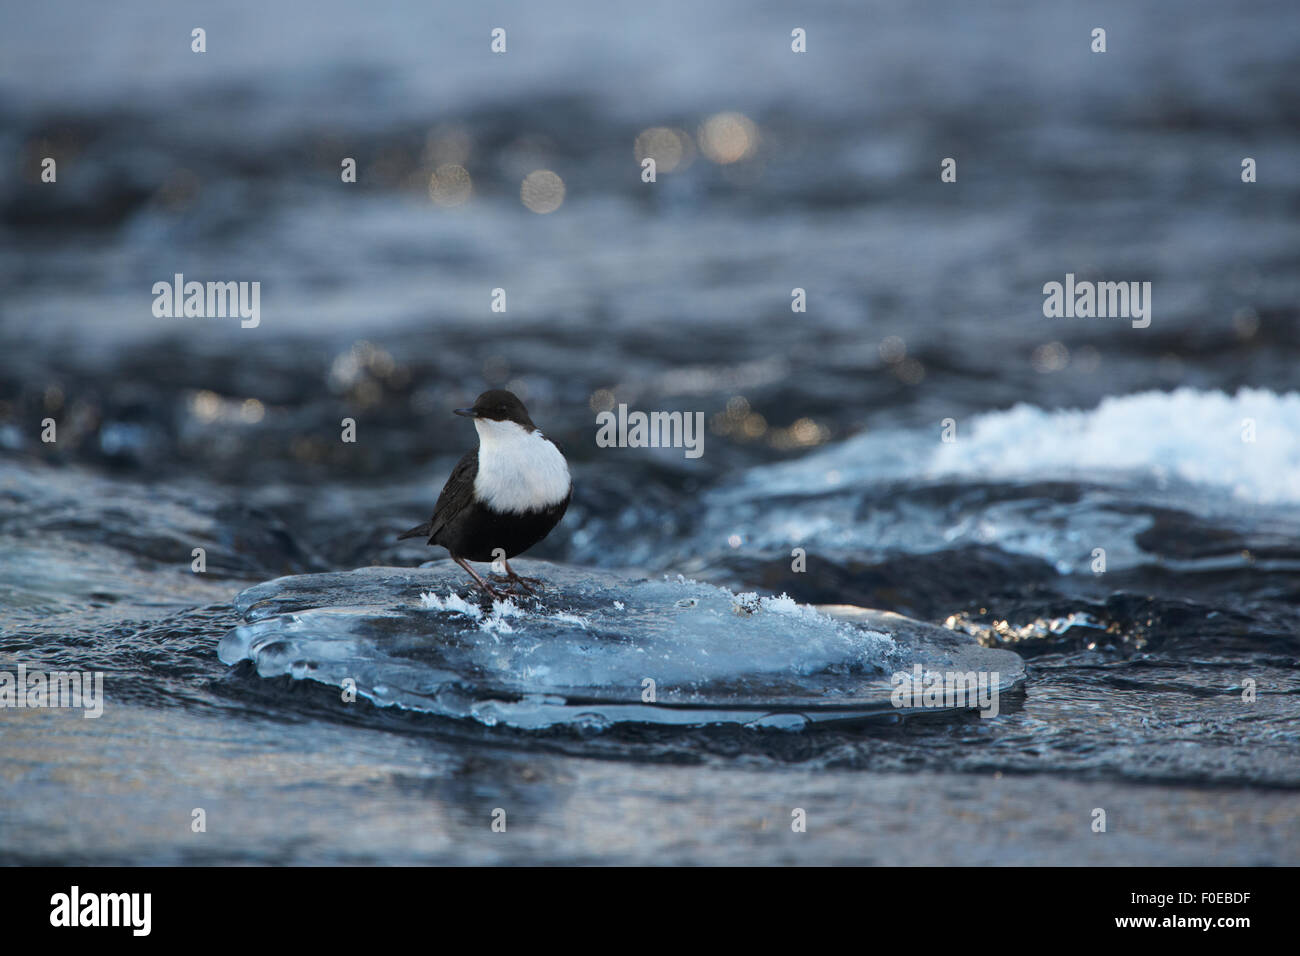 White-throated dipper (Cinclus cinclus) on circular patch of ice in the Kitkajoki River, Finland, February 2009 Stock Photo